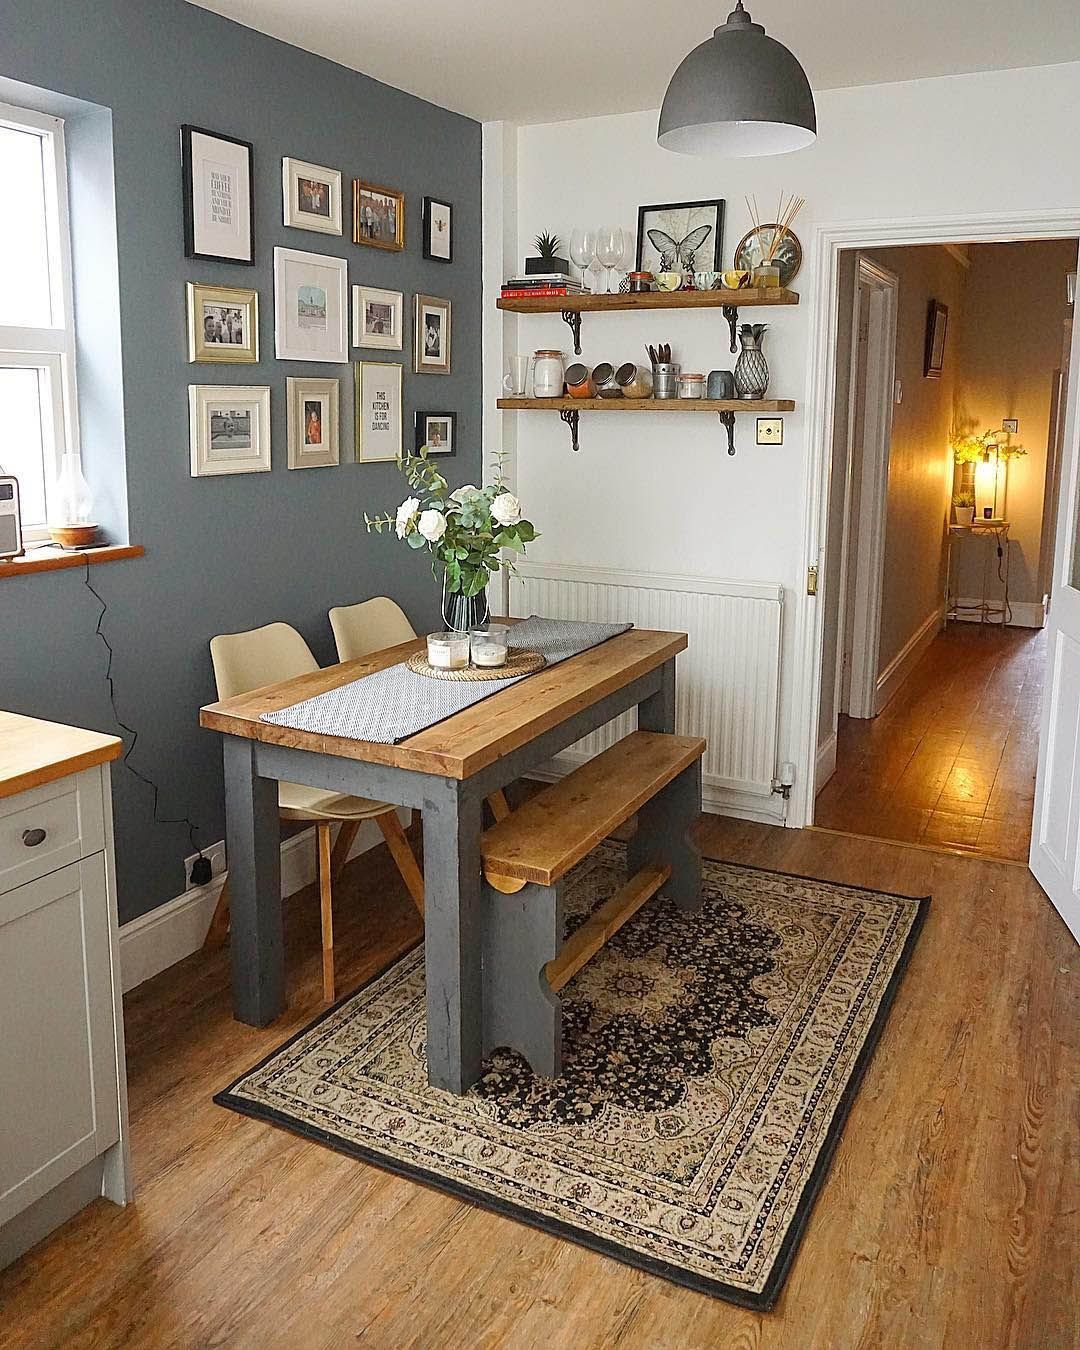 8 Small Kitchen Table Ideas for Your Home